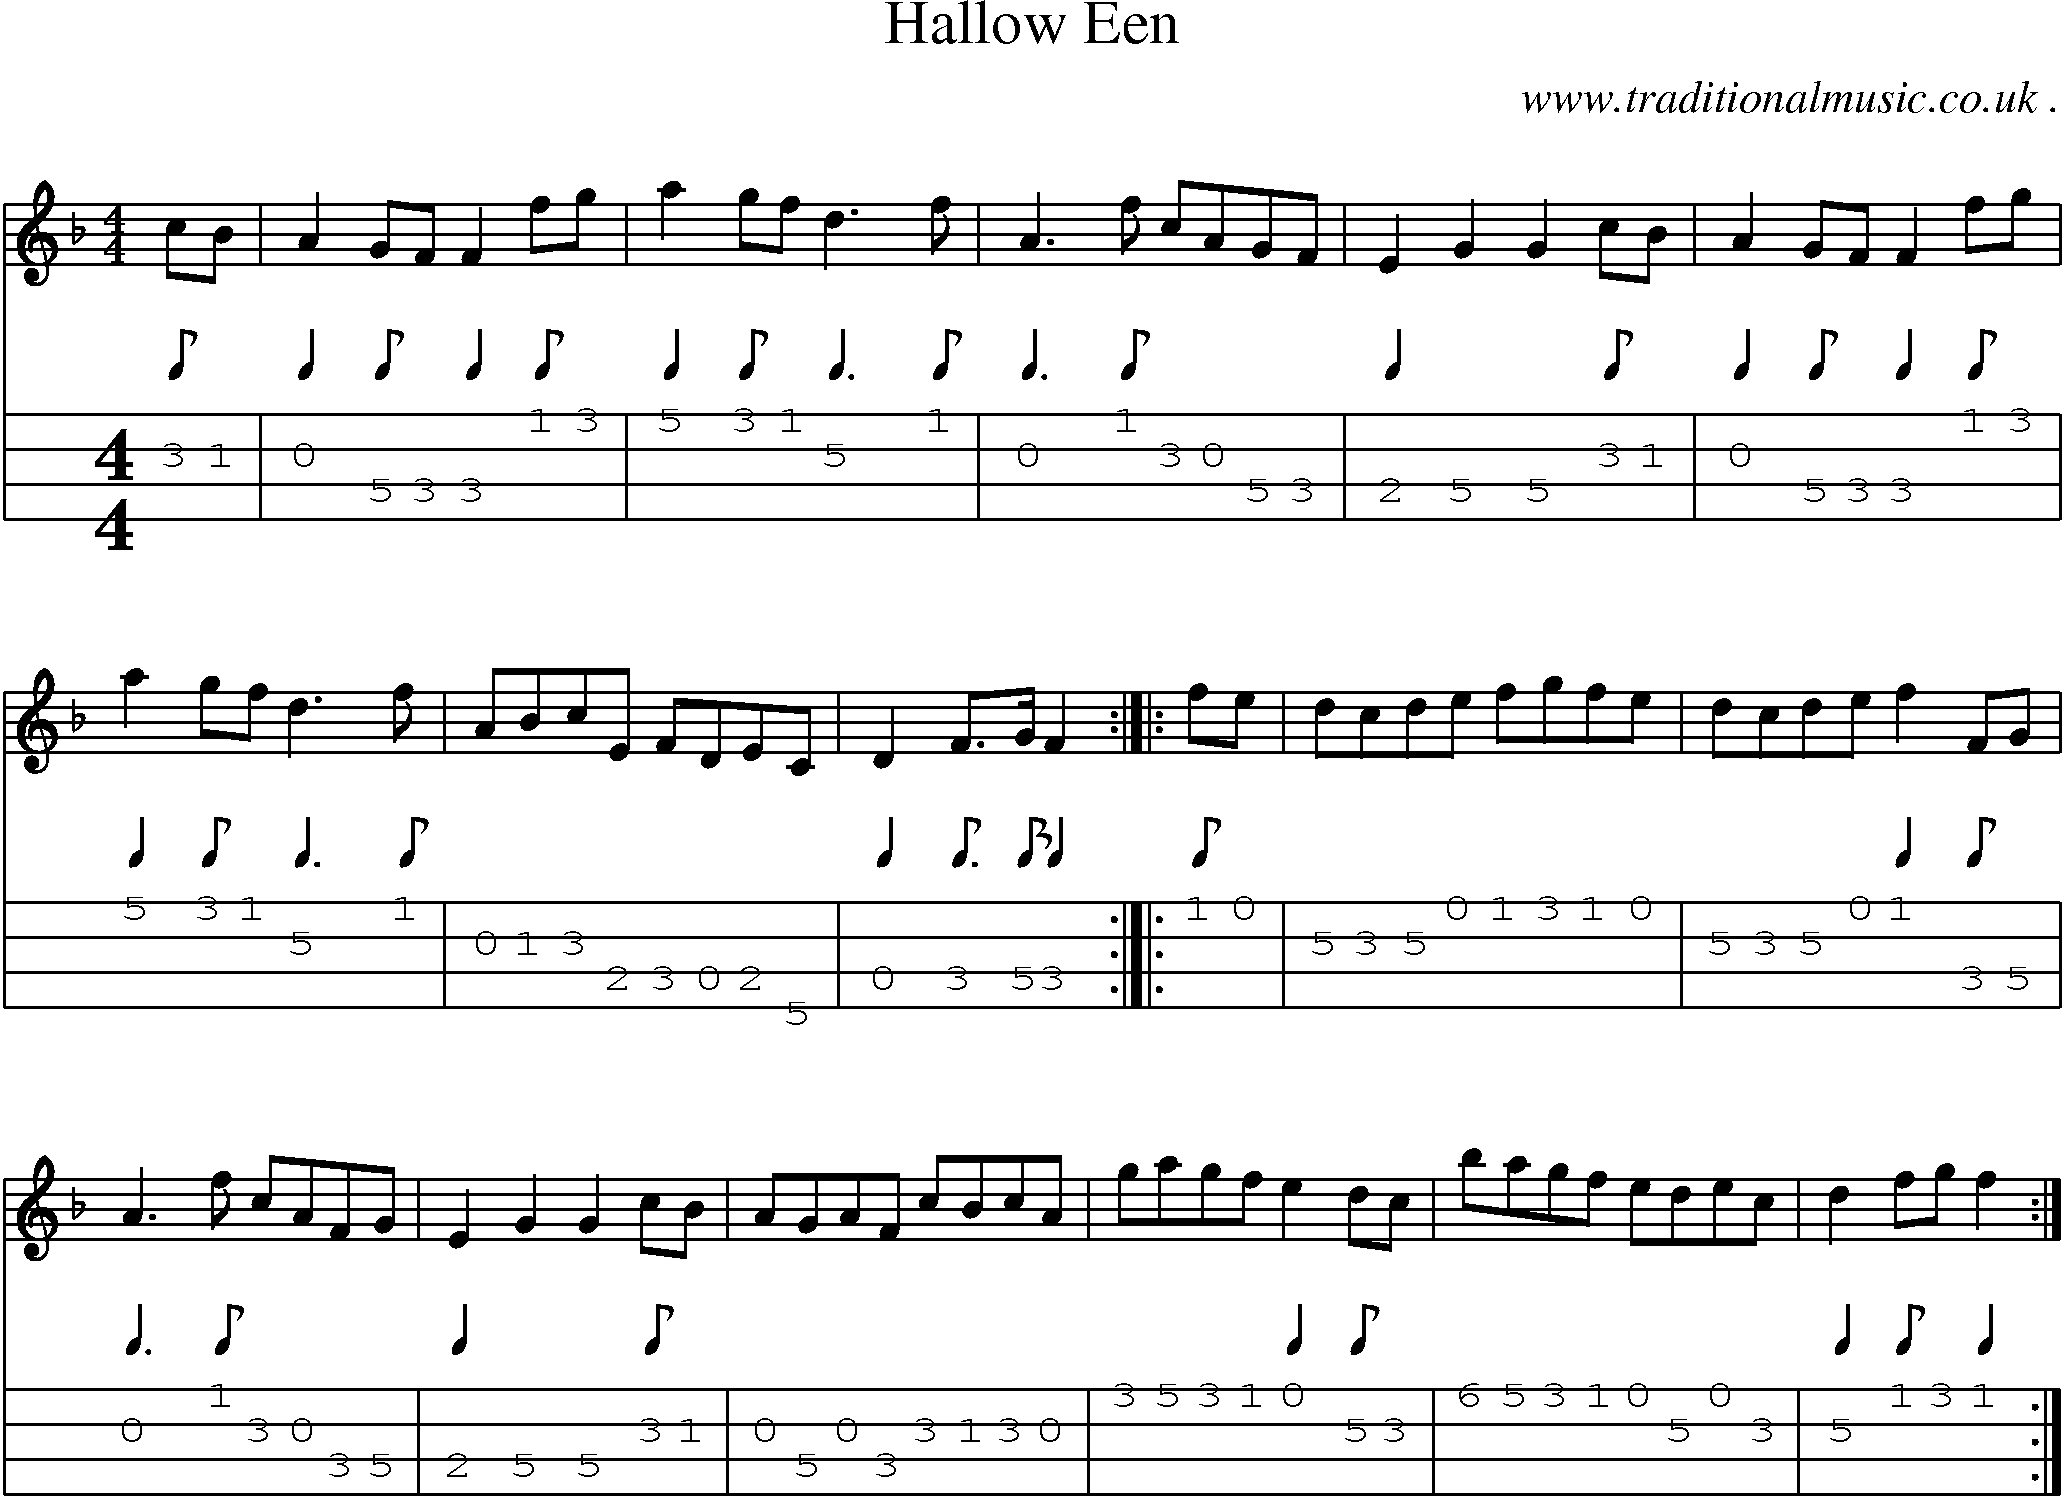 Sheet-music  score, Chords and Mandolin Tabs for Hallow Een